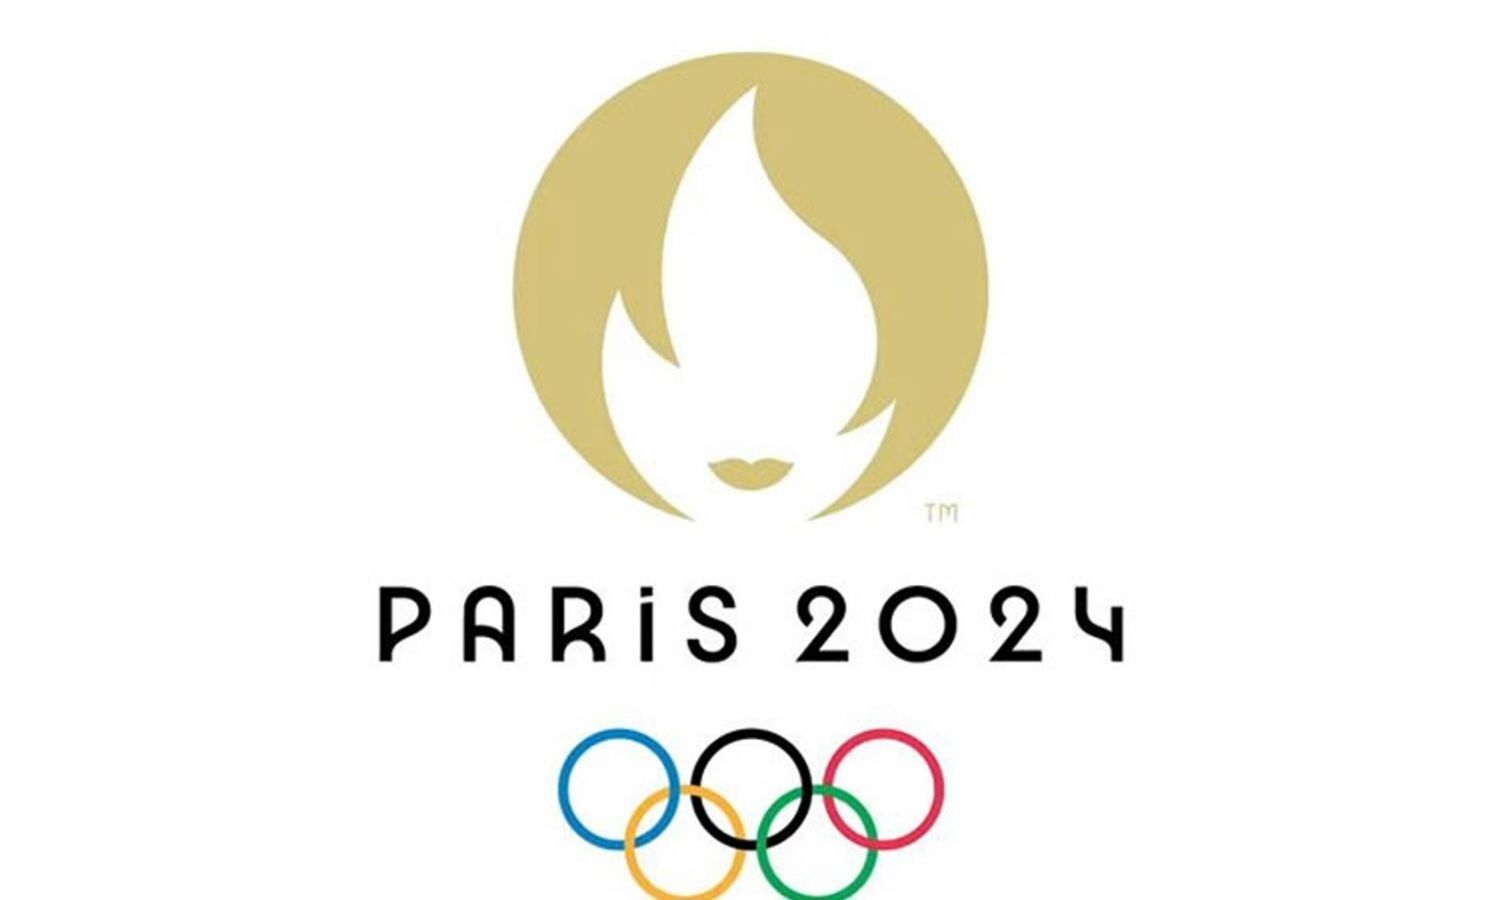 Paris Games opening ceremony hit with security and transportation issues